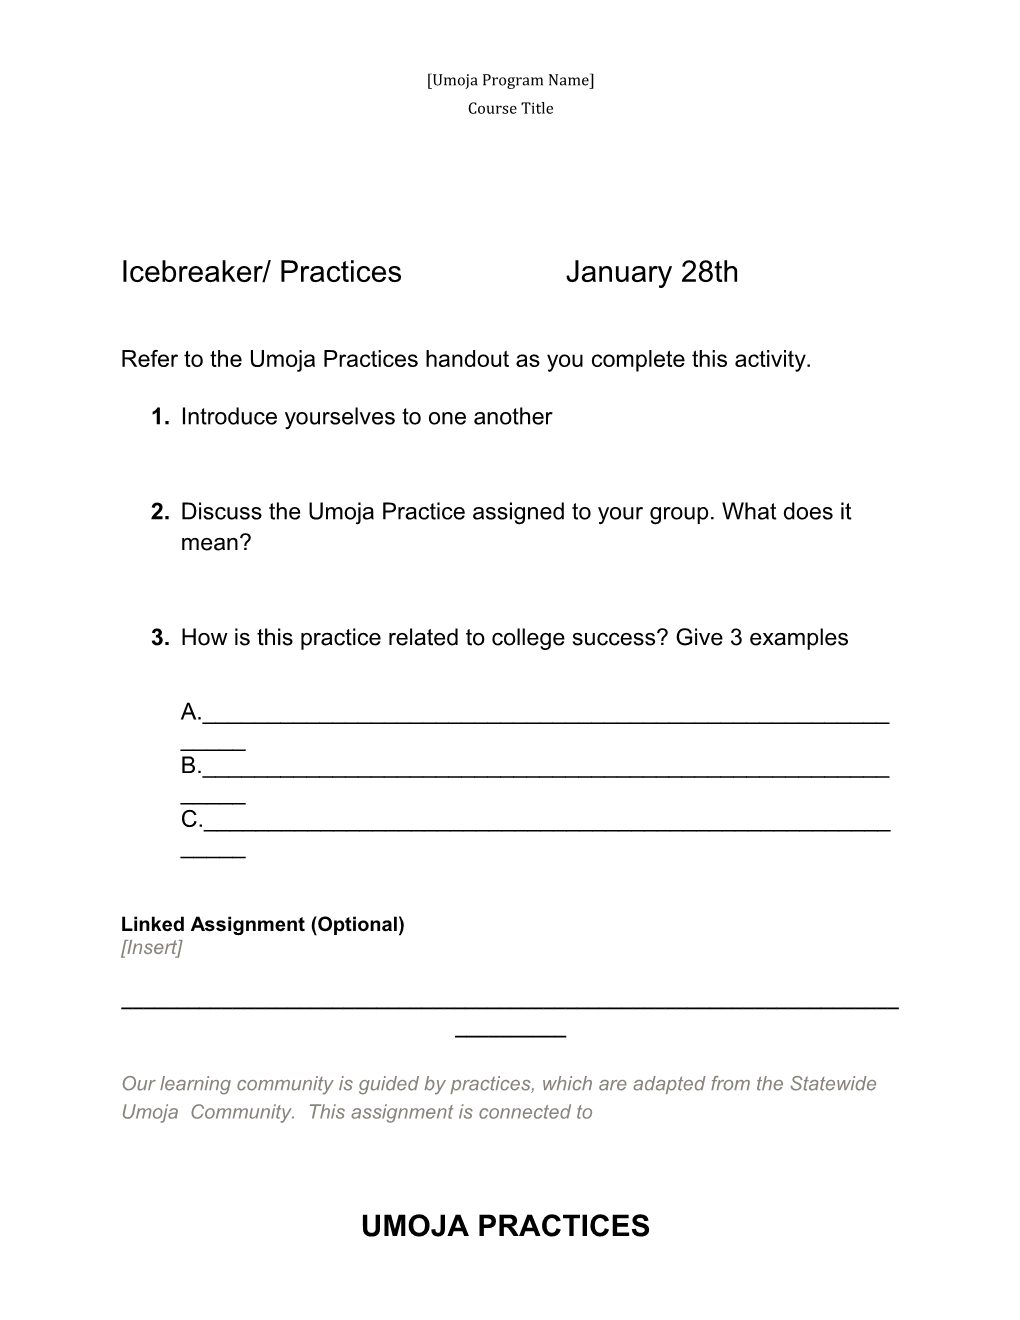 Refer to the Umoja Practices Handout As You Complete This Activity